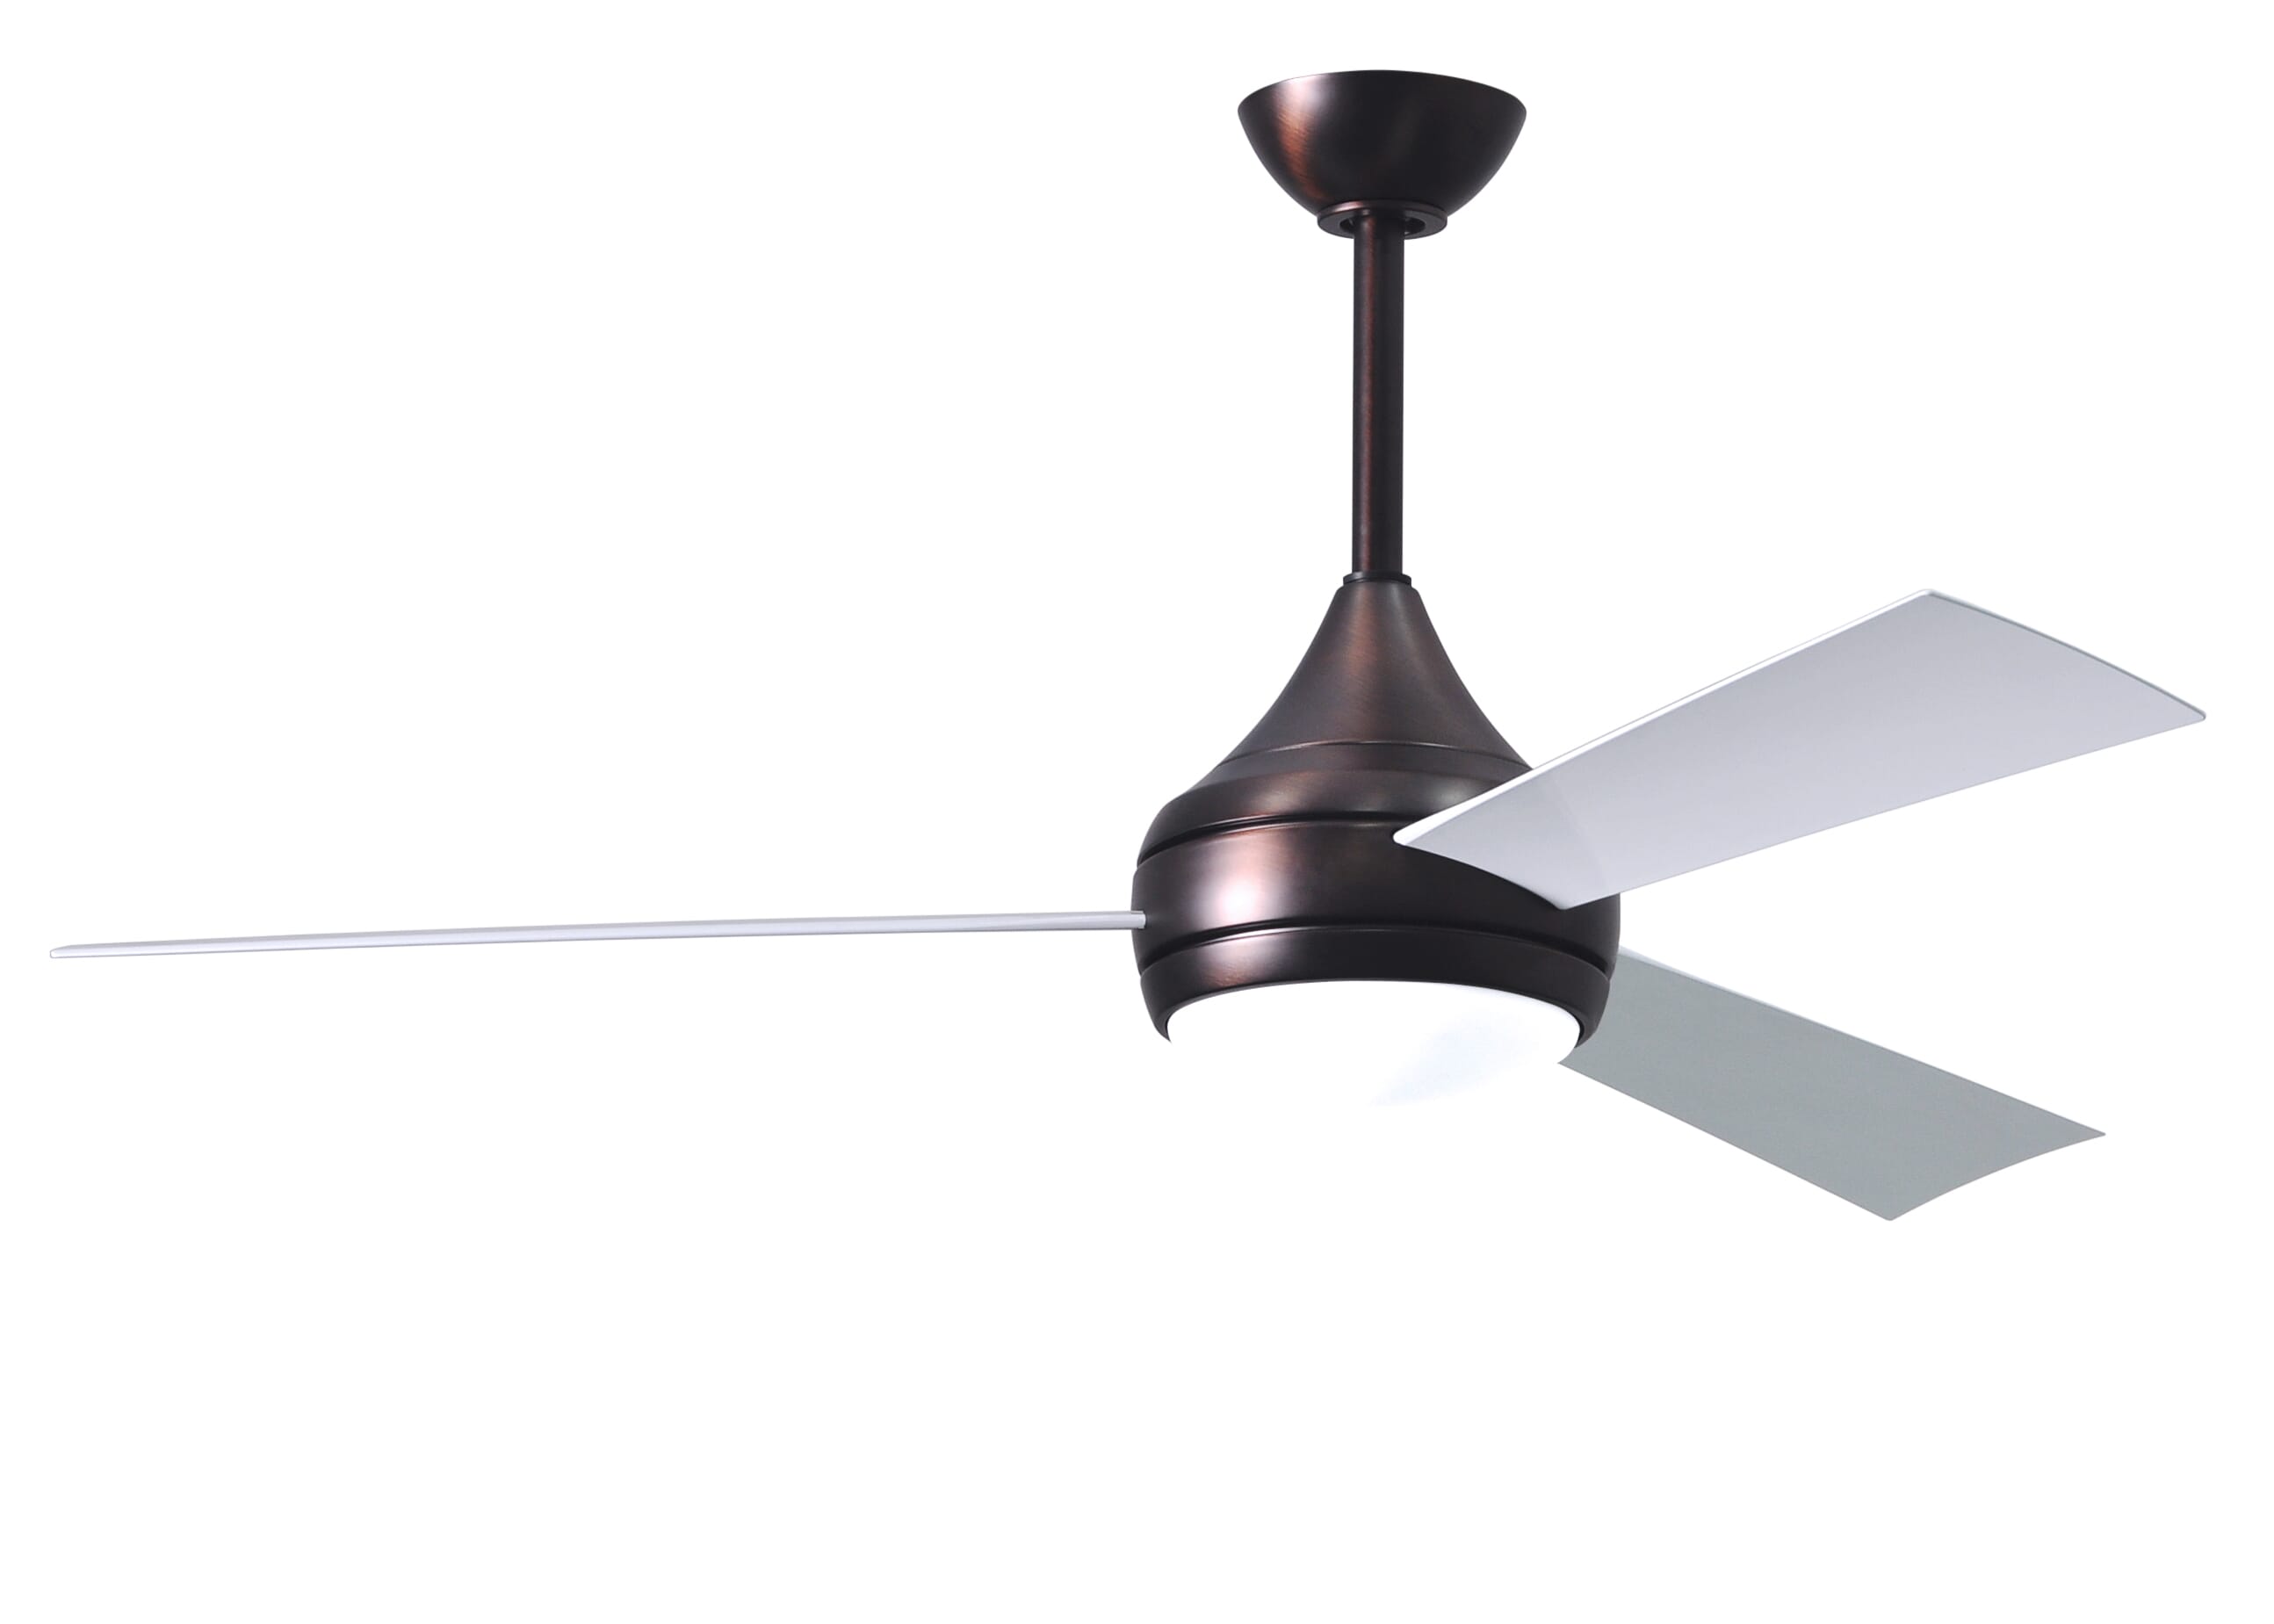 Matthews Donaire 52"" Indoor/Outdoor Ceiling Fan in Brushed Bronze with White Blades - DA-BB-WH -  Matthews Fan Company